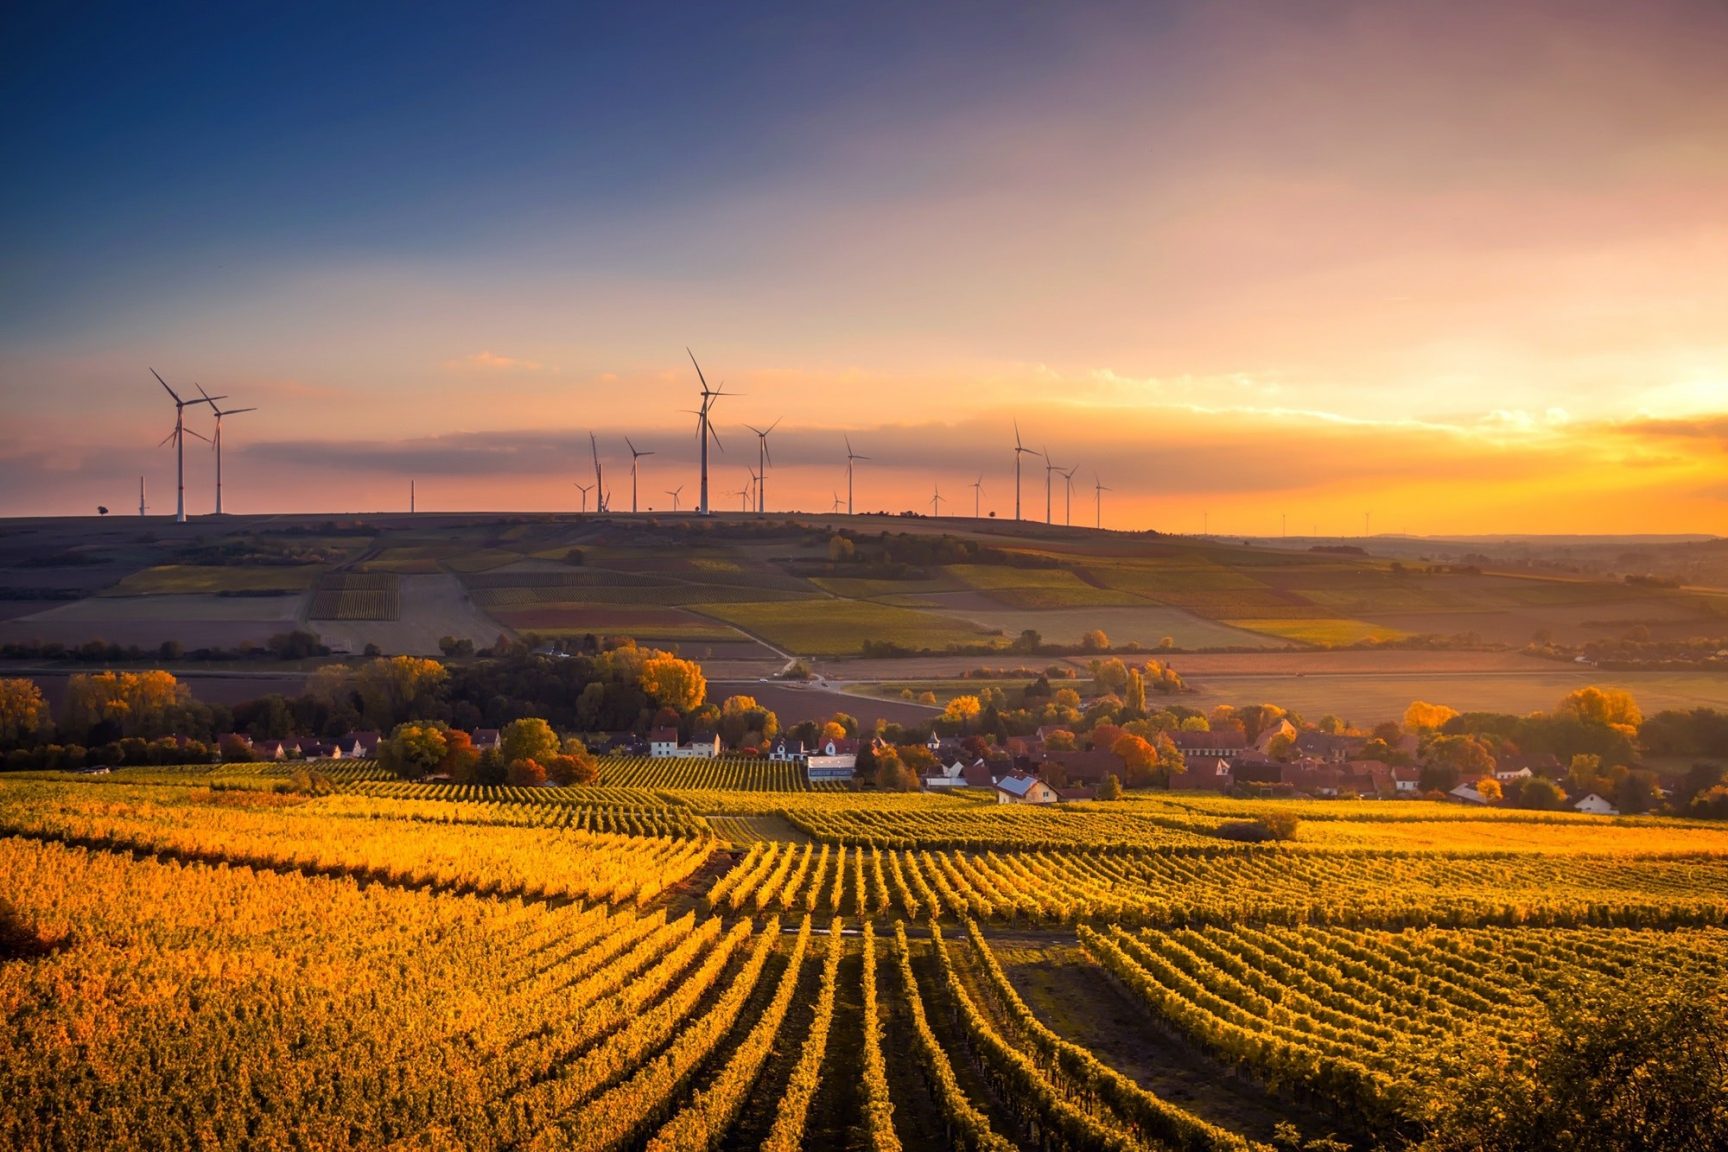 A landscape at sunset. There is a field of crops, a small valley with a village, and wind turbines in the distance.